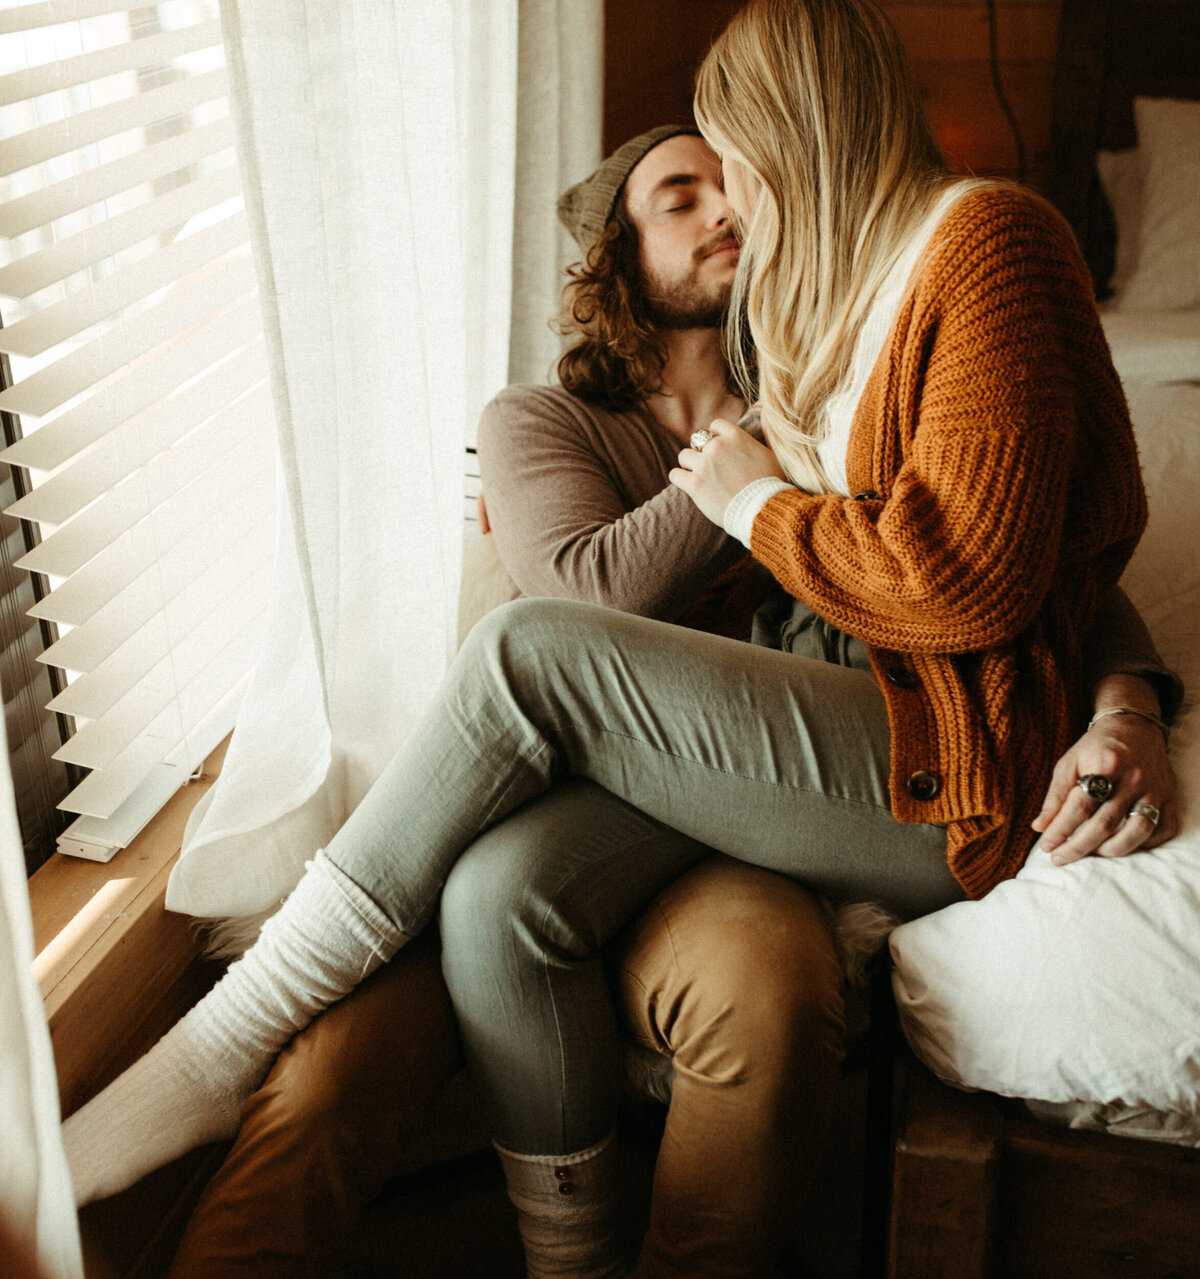 Couple in cozy winter outfit snuggling in their home next to a window